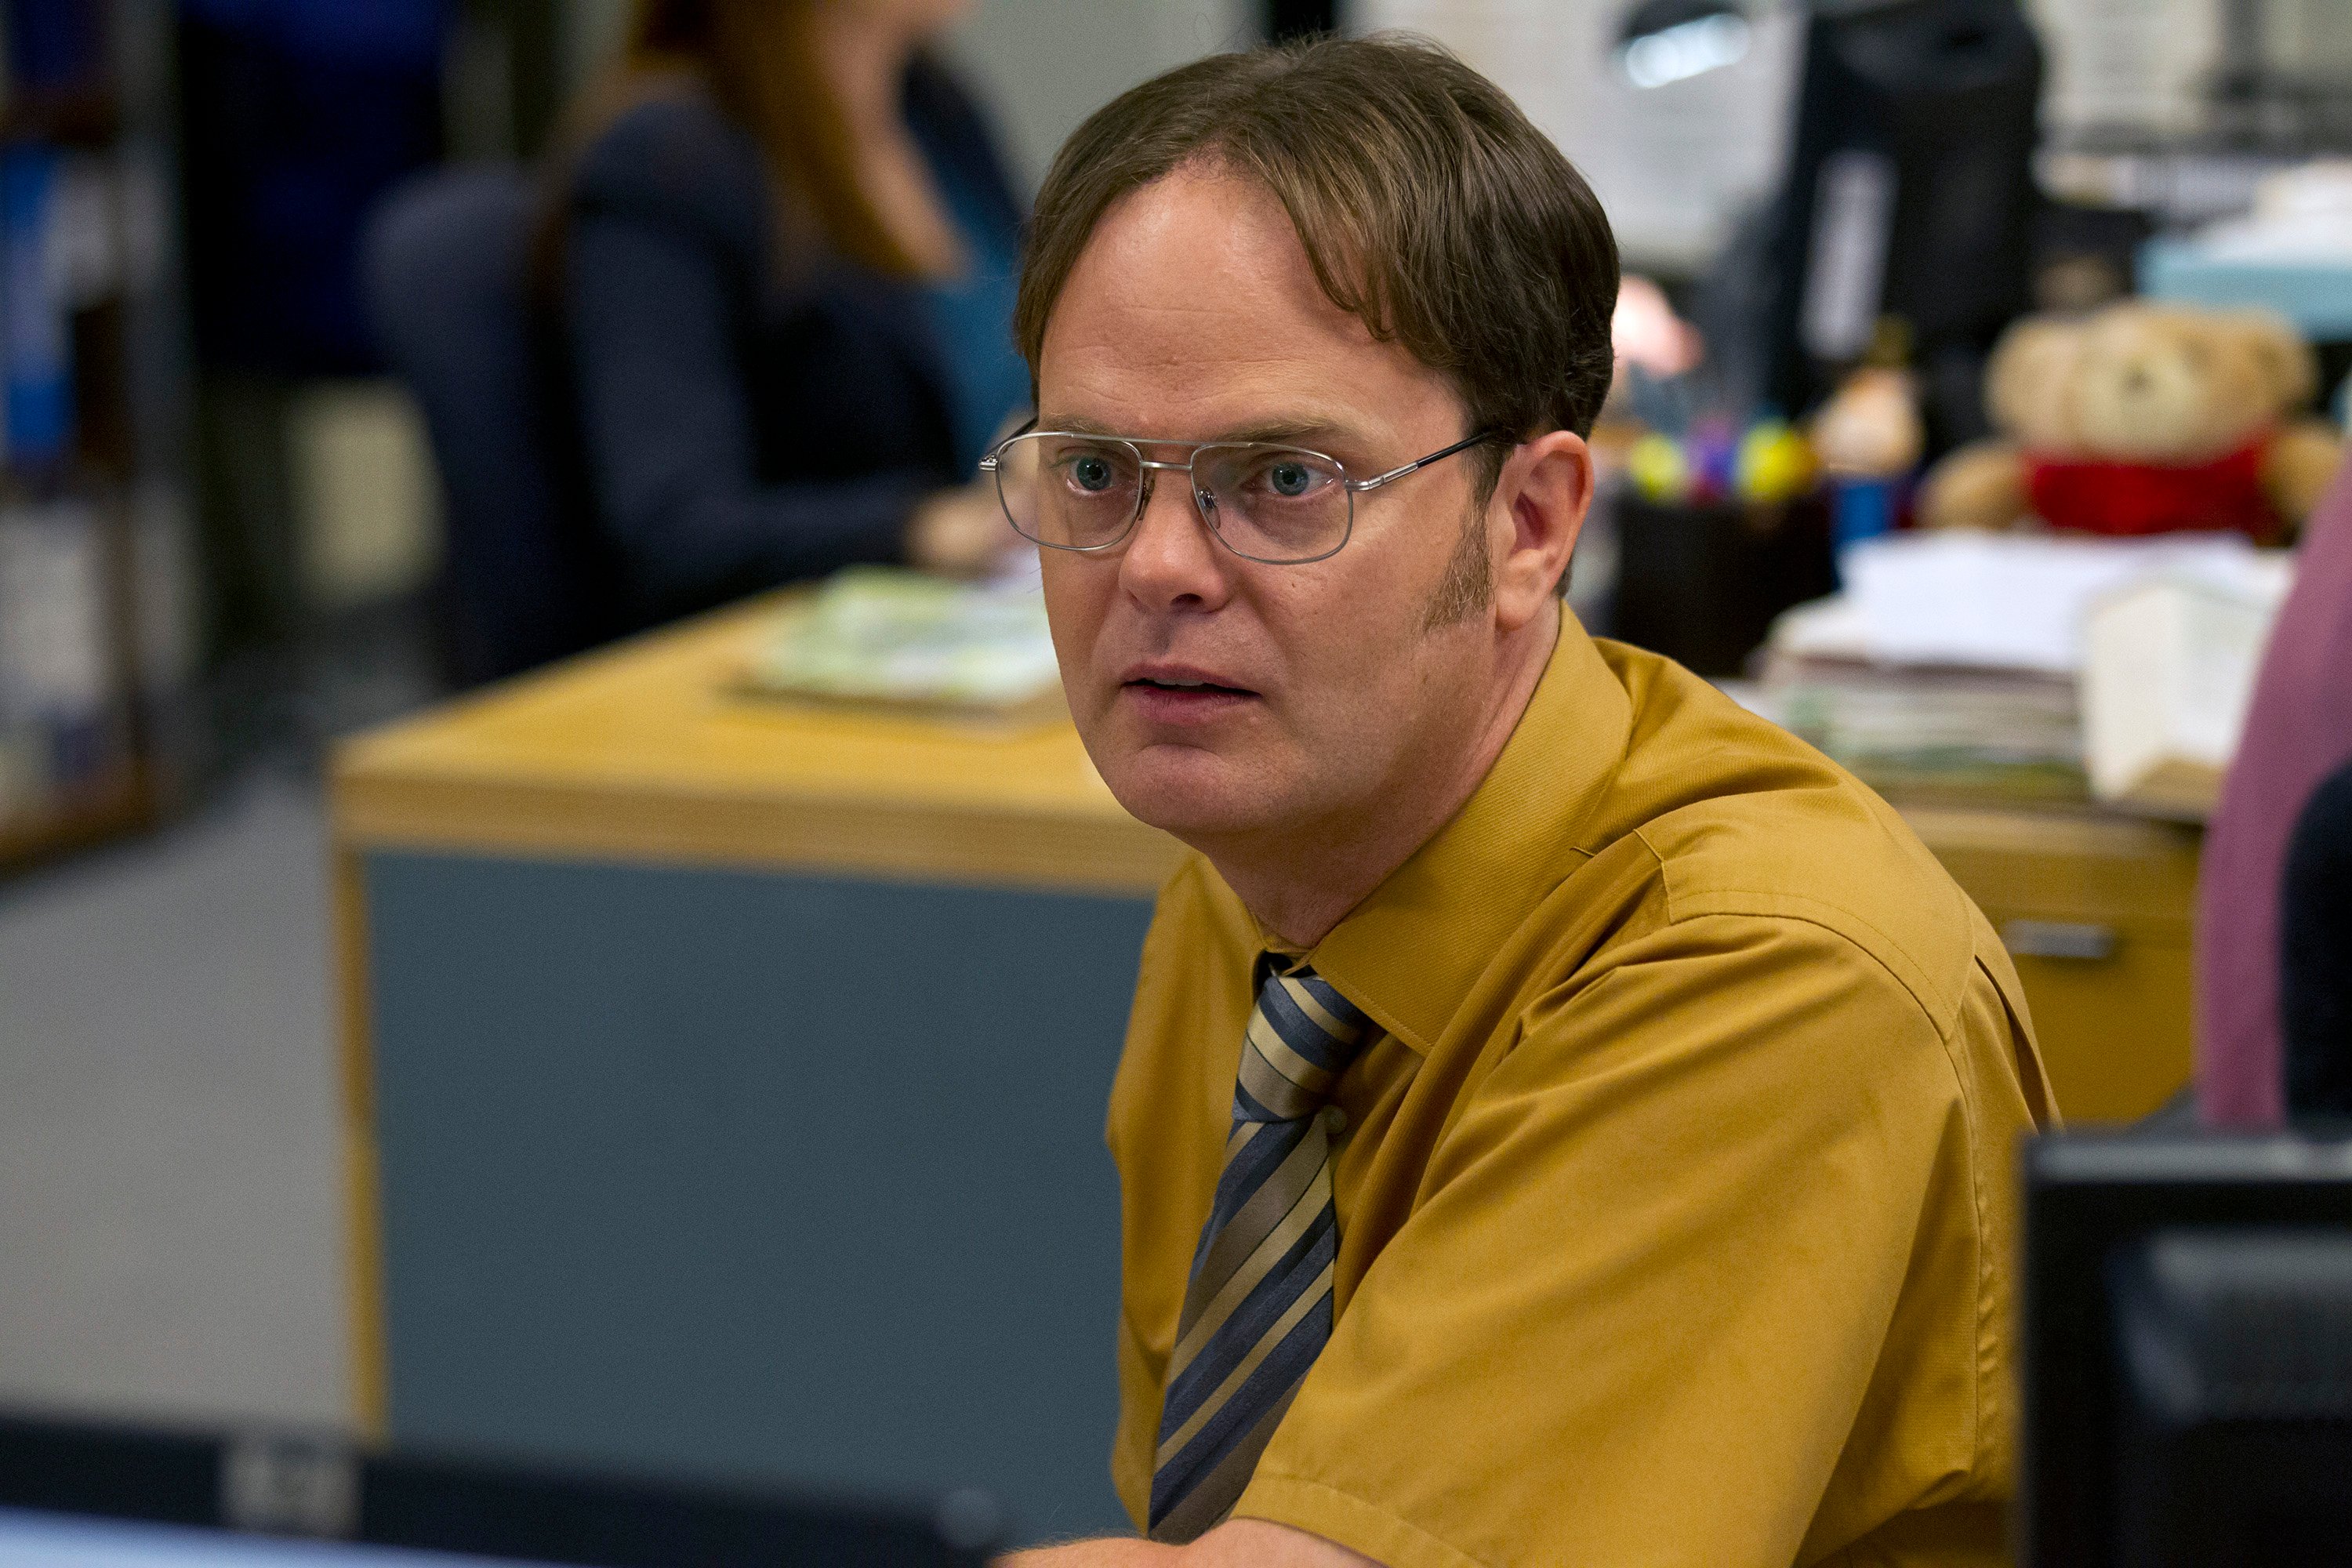 Rainn Wilson as Dwight Schrute wearing his quintessential wardrobe in 'The Office'